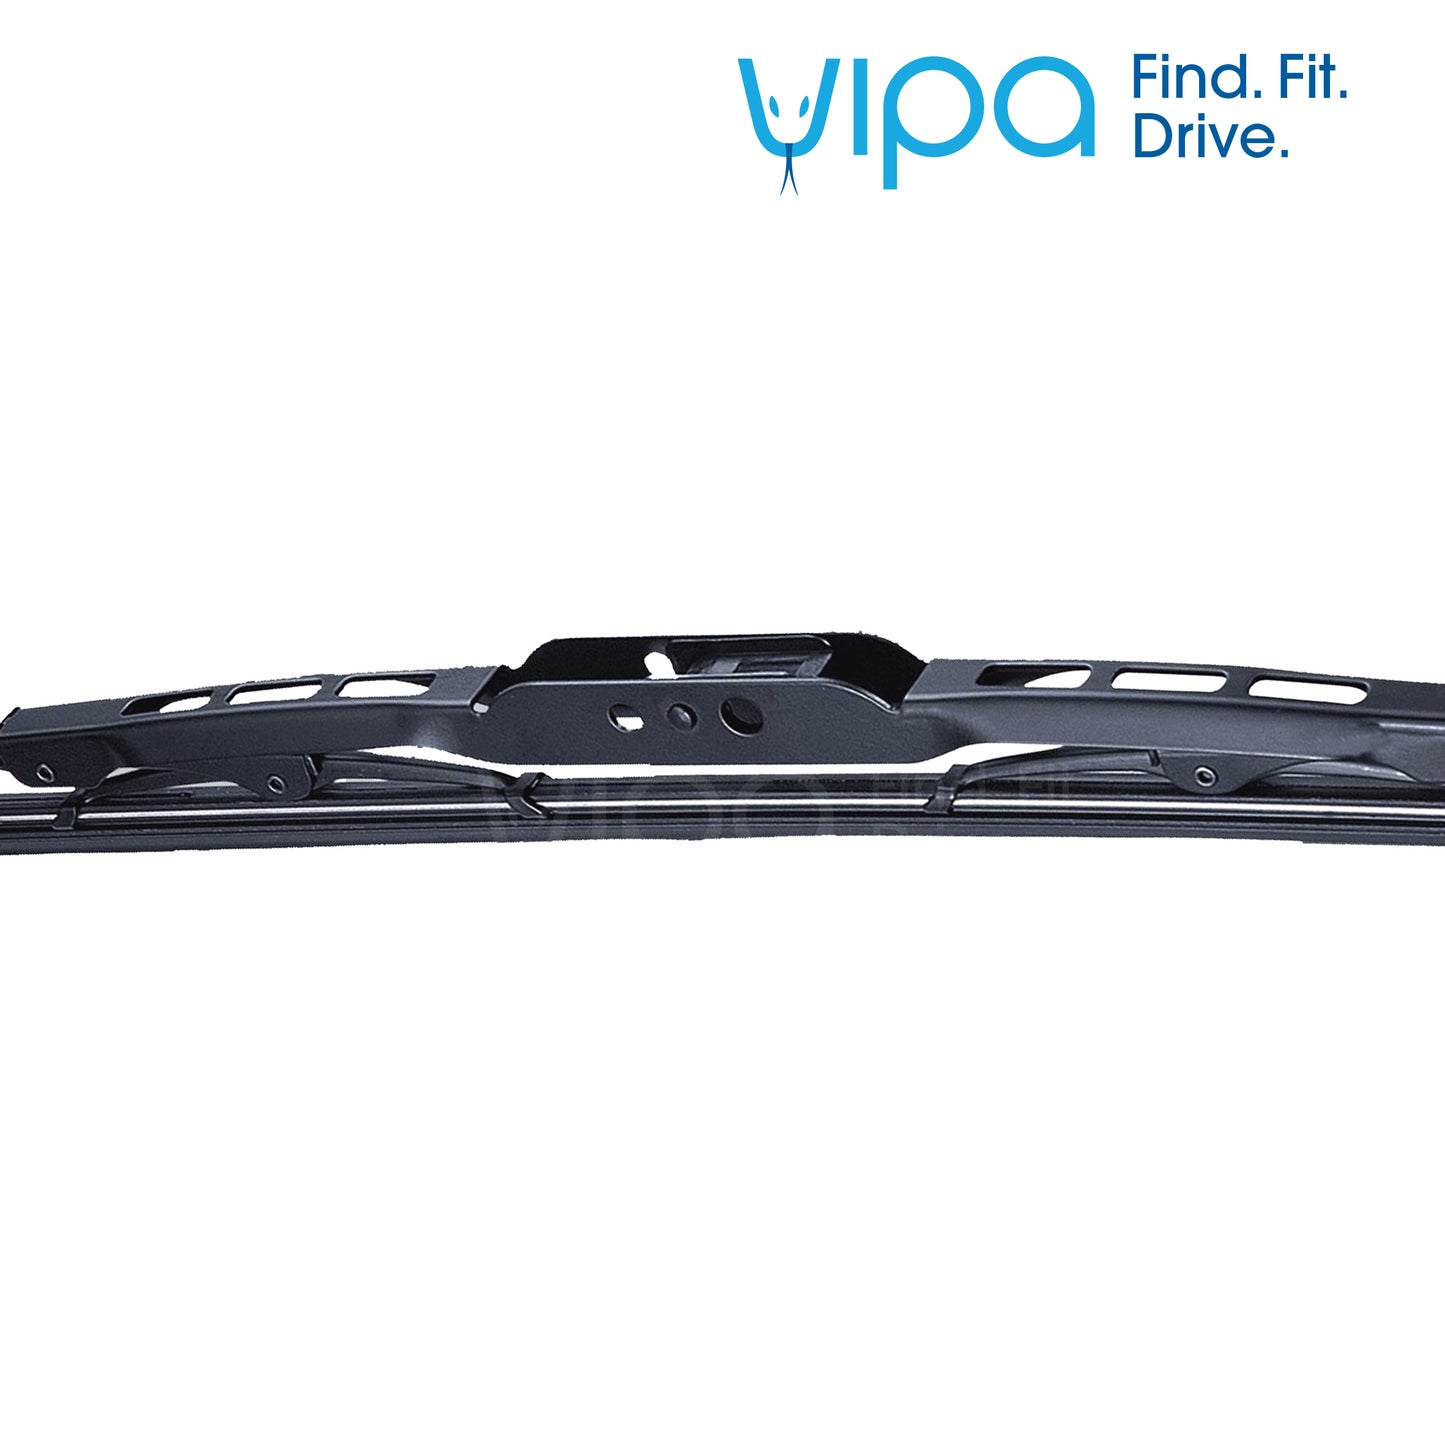 PROTON COMPACT Hatchback Apr 1996 to May 2006 Wiper Blade Kit